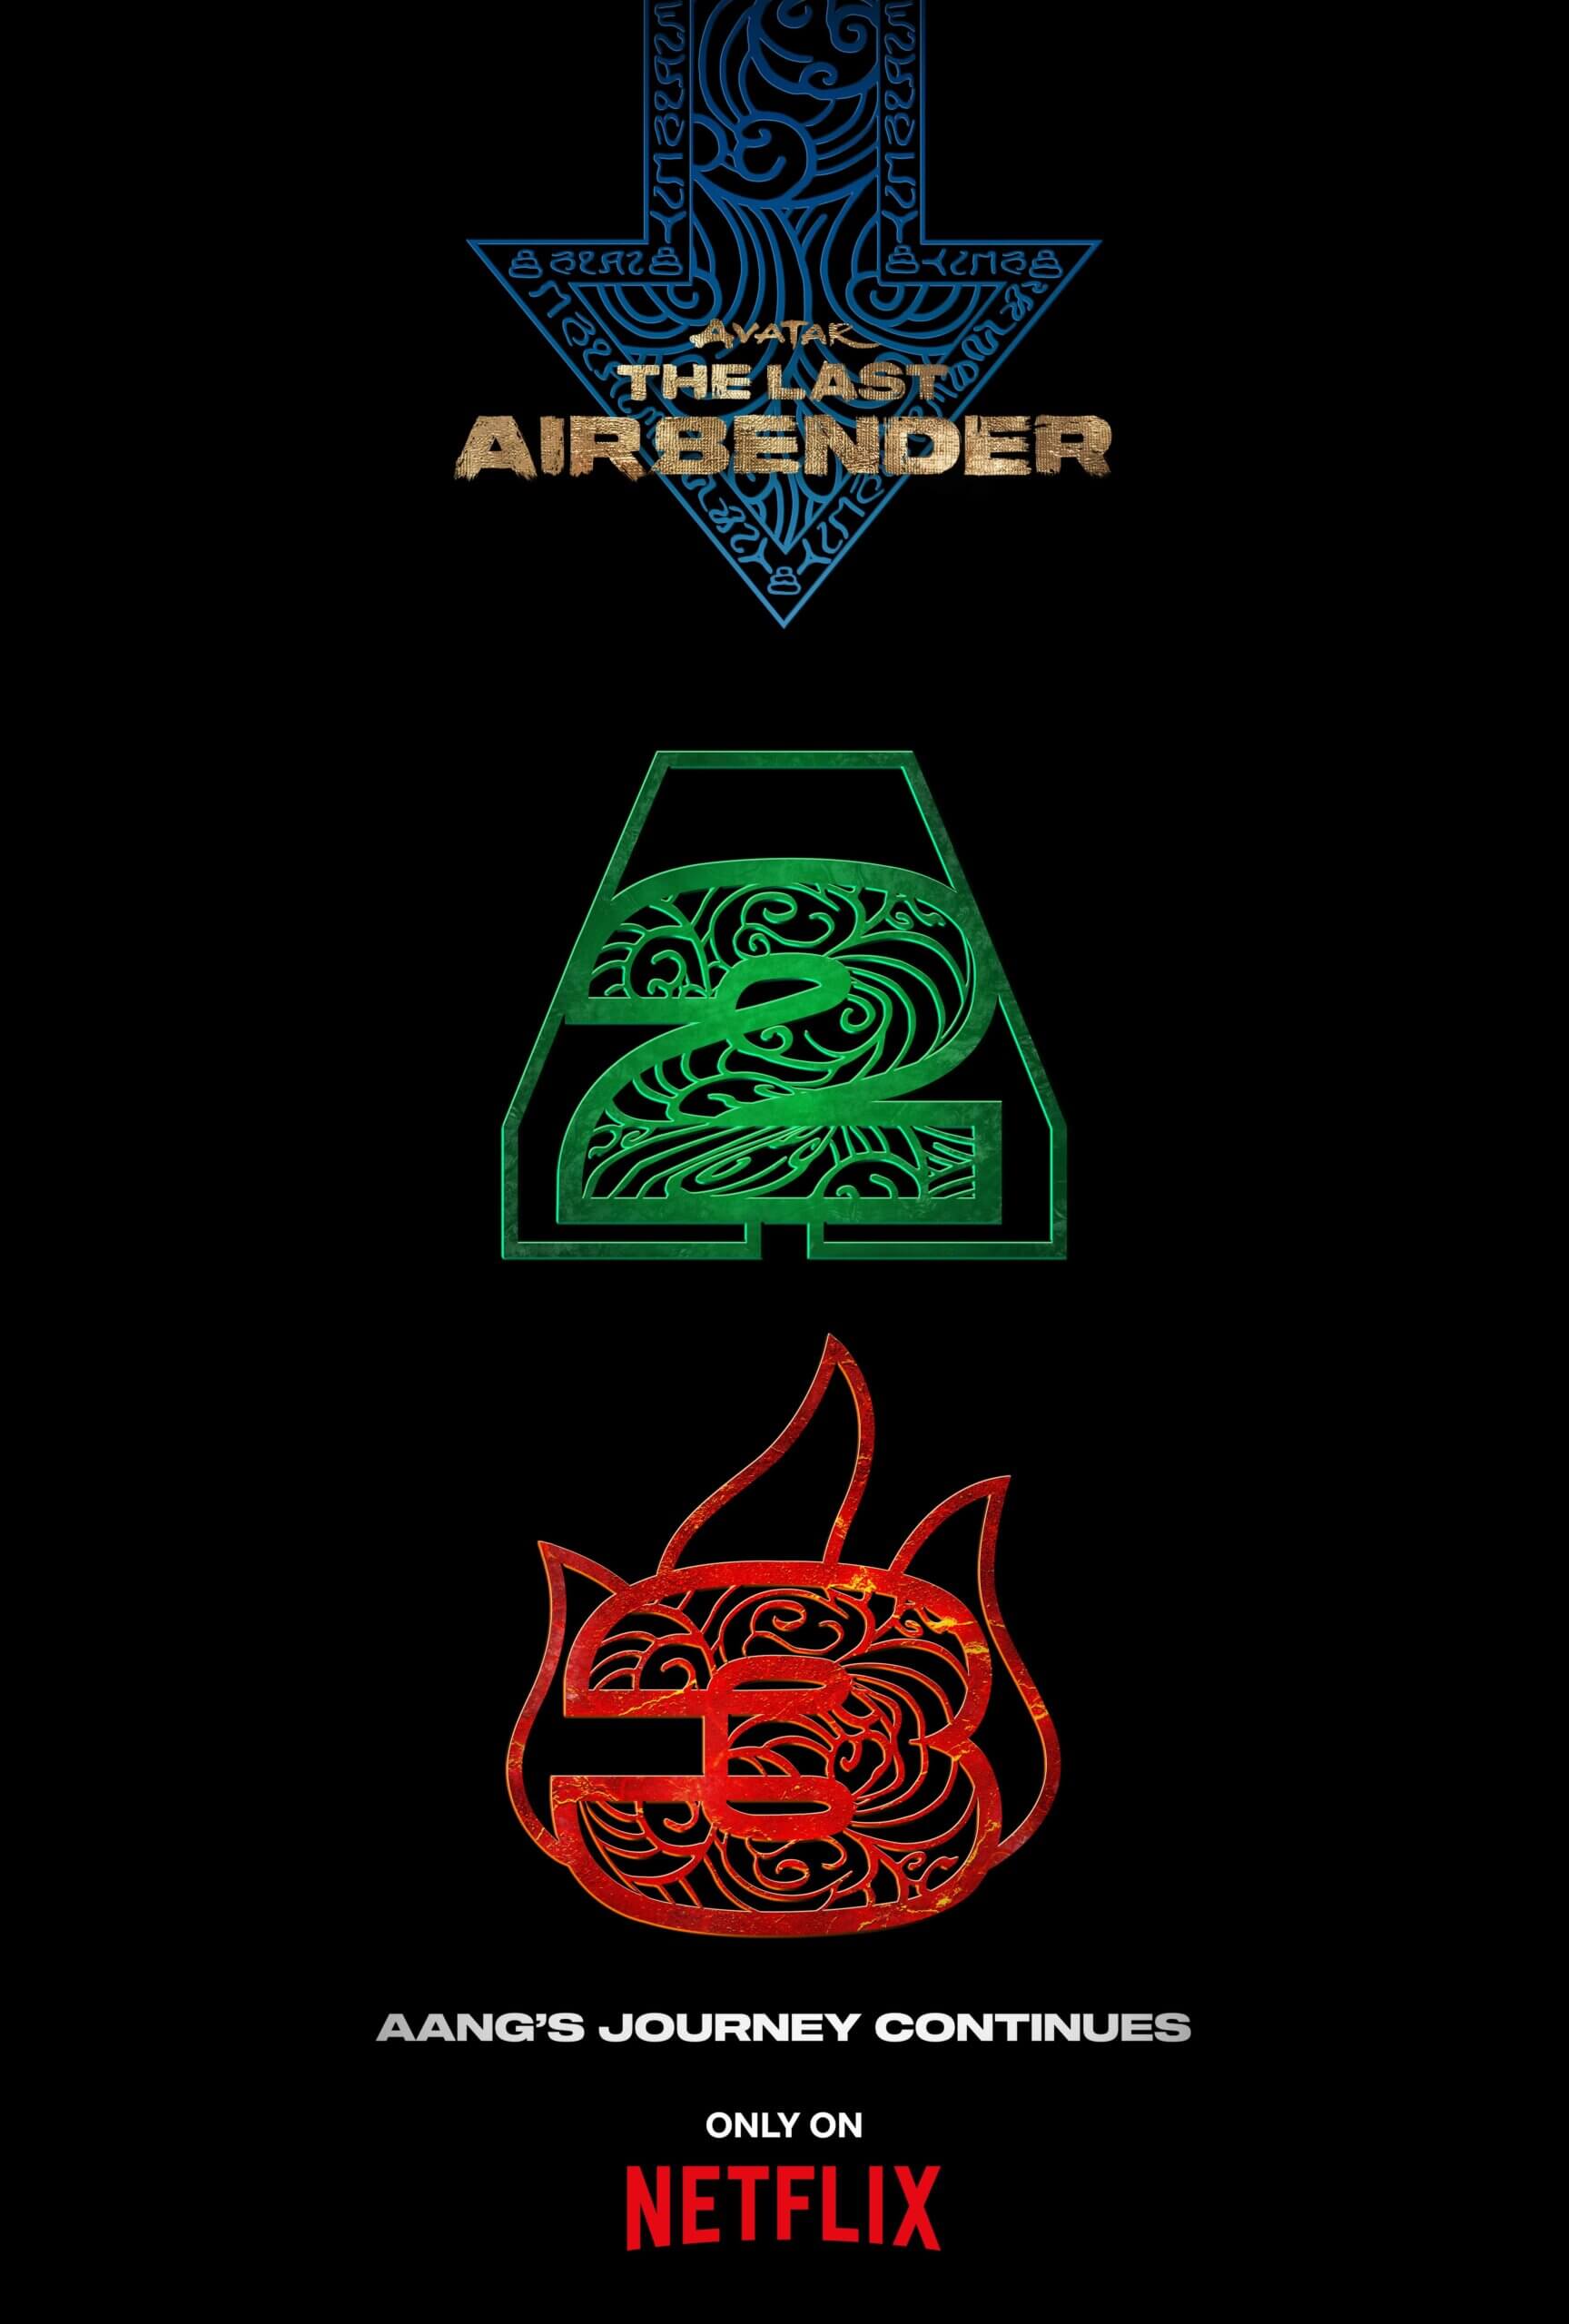 Avatar The Last Airbender Seasons 2 3 Announcement Poster